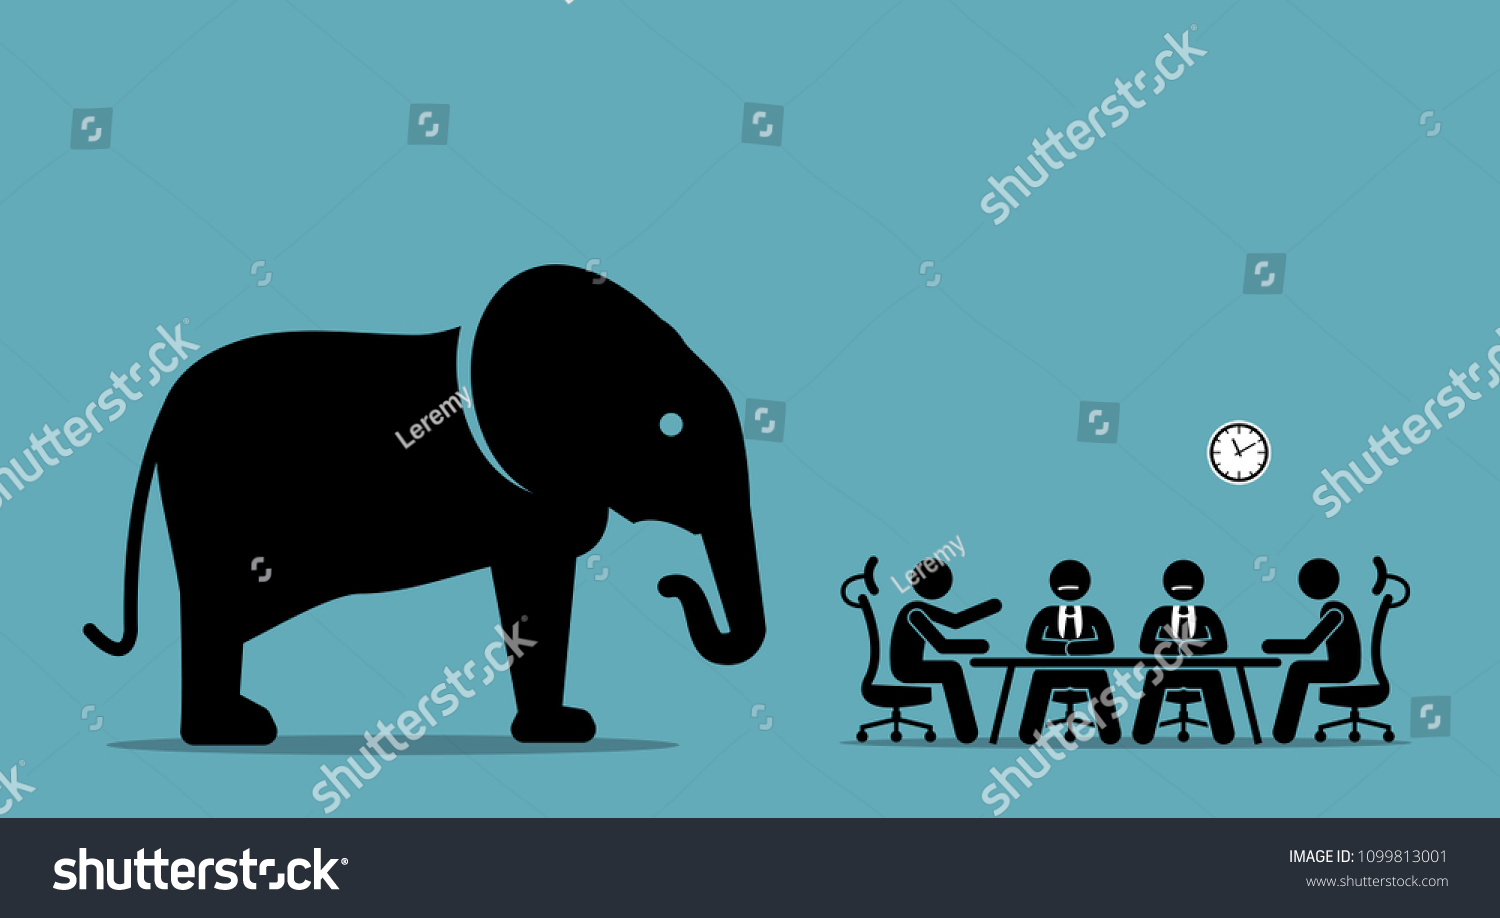 SVG of Elephant in the room. Vector artwork illustration depicts the concept of obvious problem, avoiding difficult situation, and evading unpleasant scenario.  svg